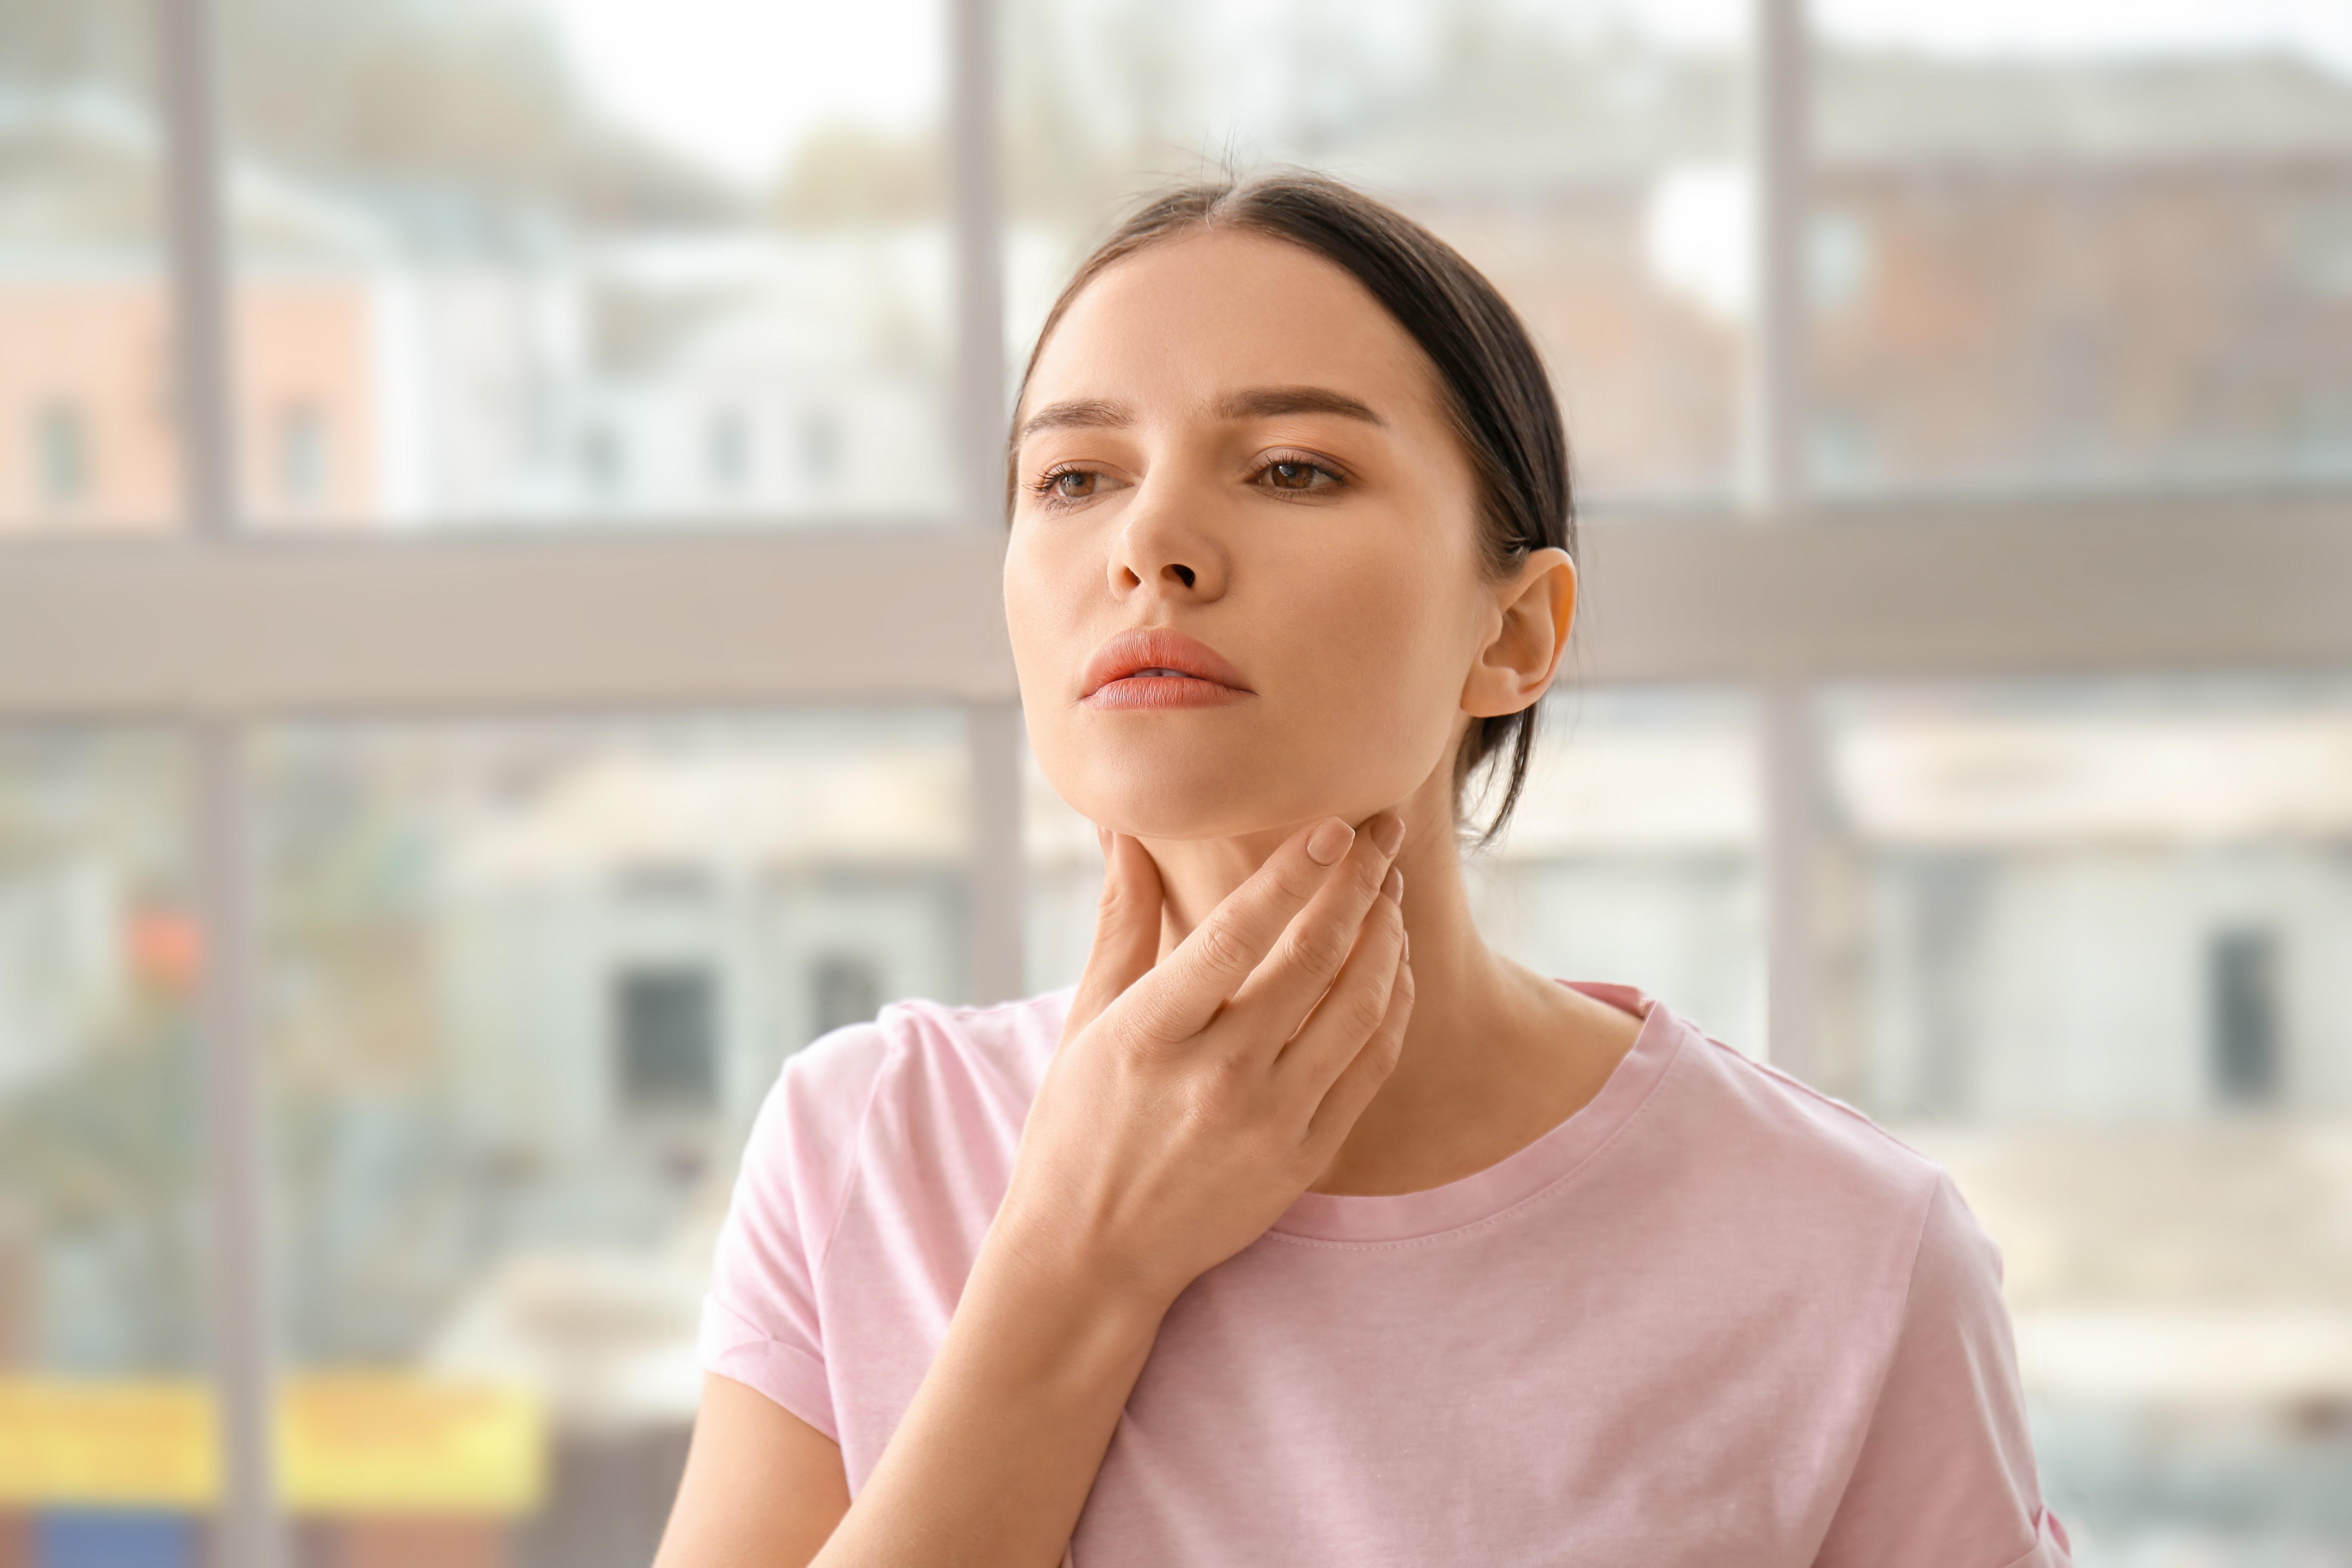 Thyroid nodules: everything you need to know